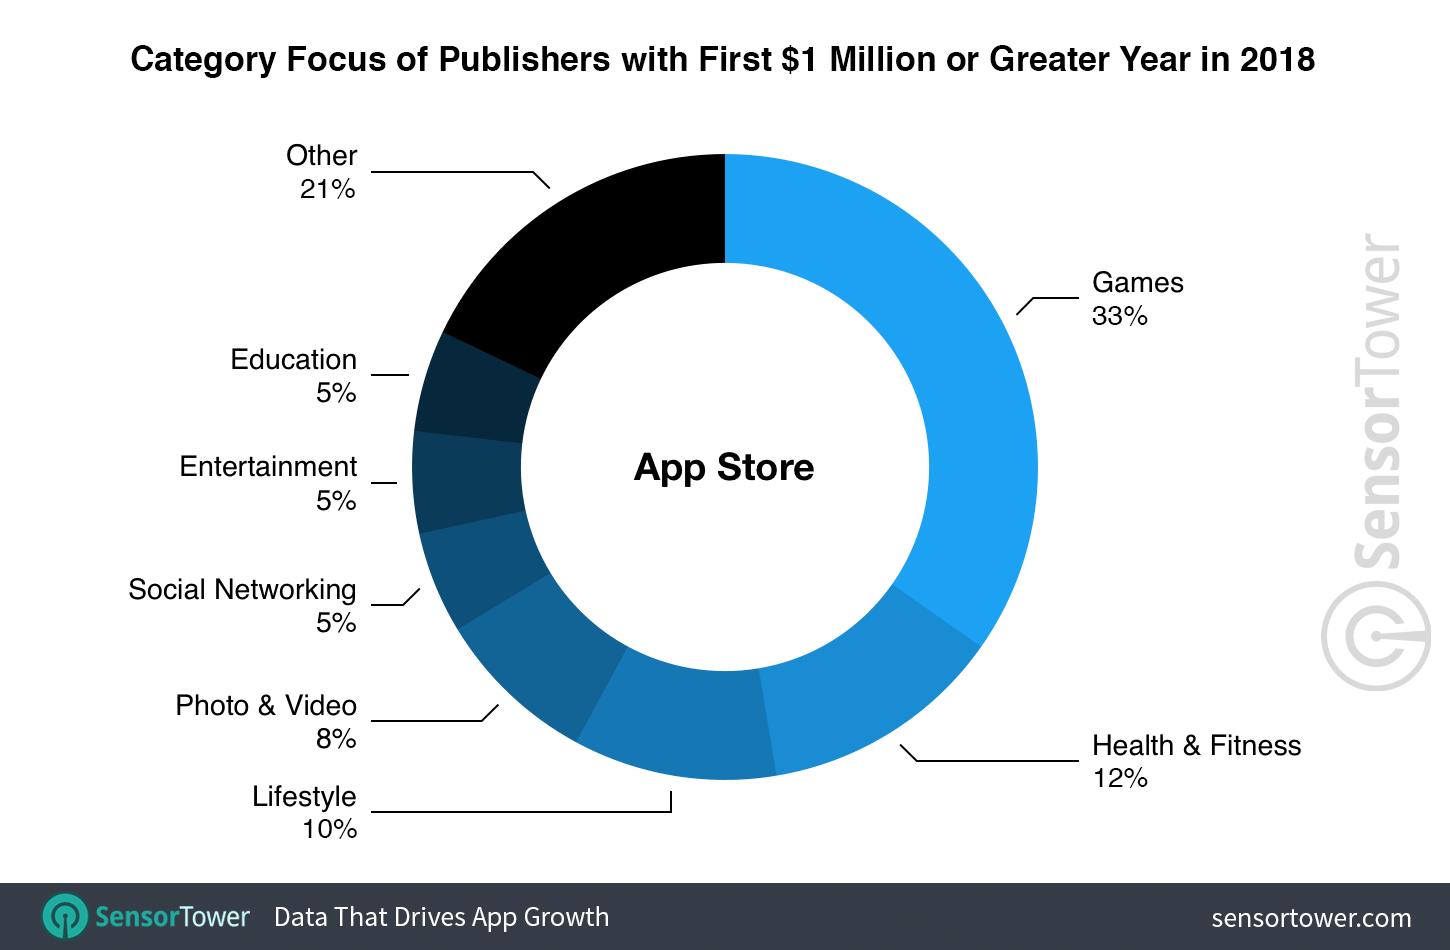 Percentage of new million-dollar publishers on the U.S. App Store by category in 2018